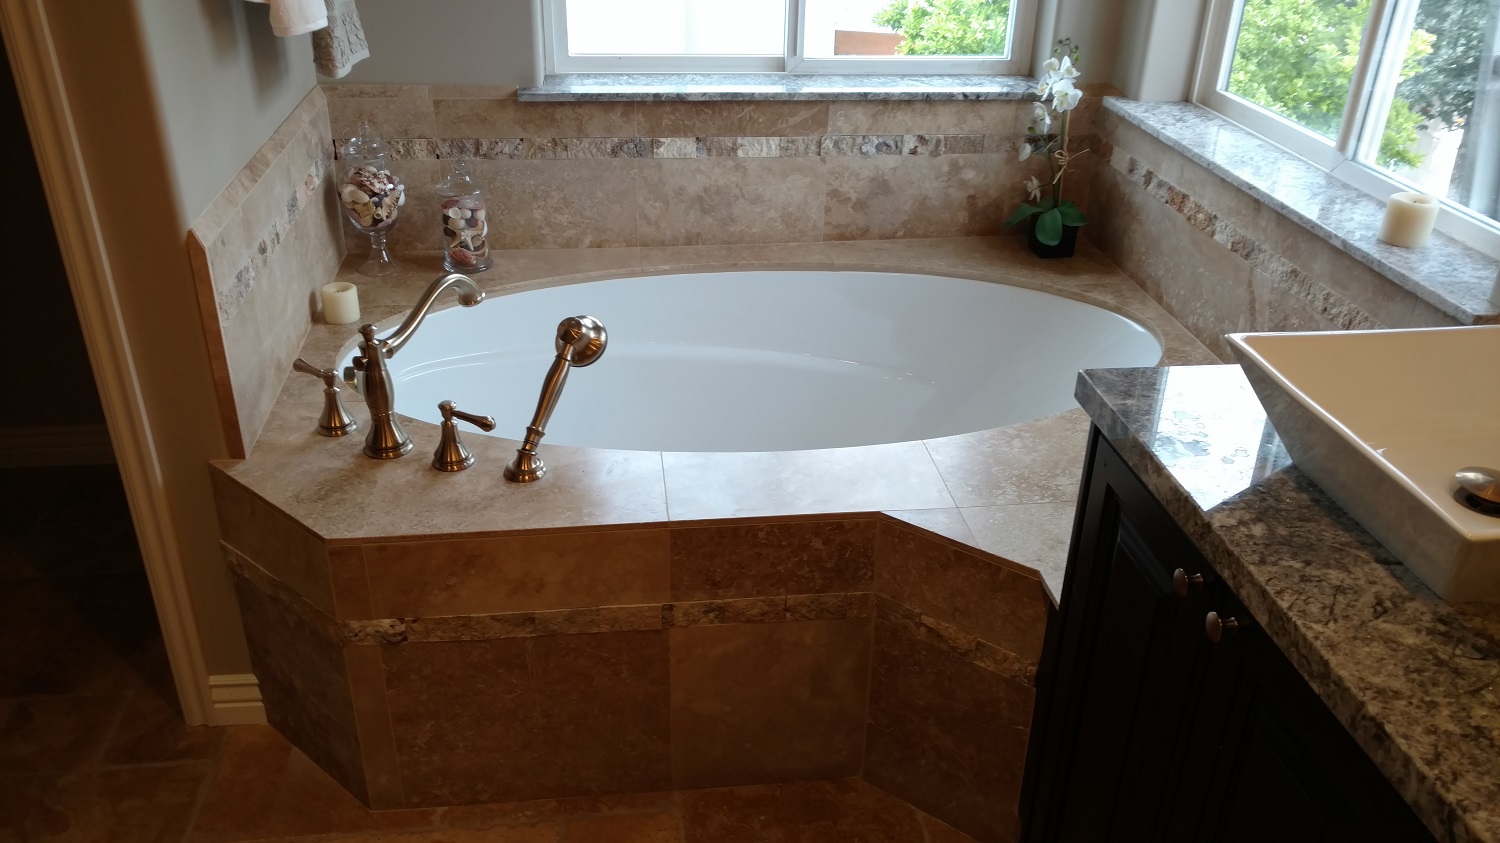 Bathroom Remodeling Contractor Services from Topp Remodeling & Construction